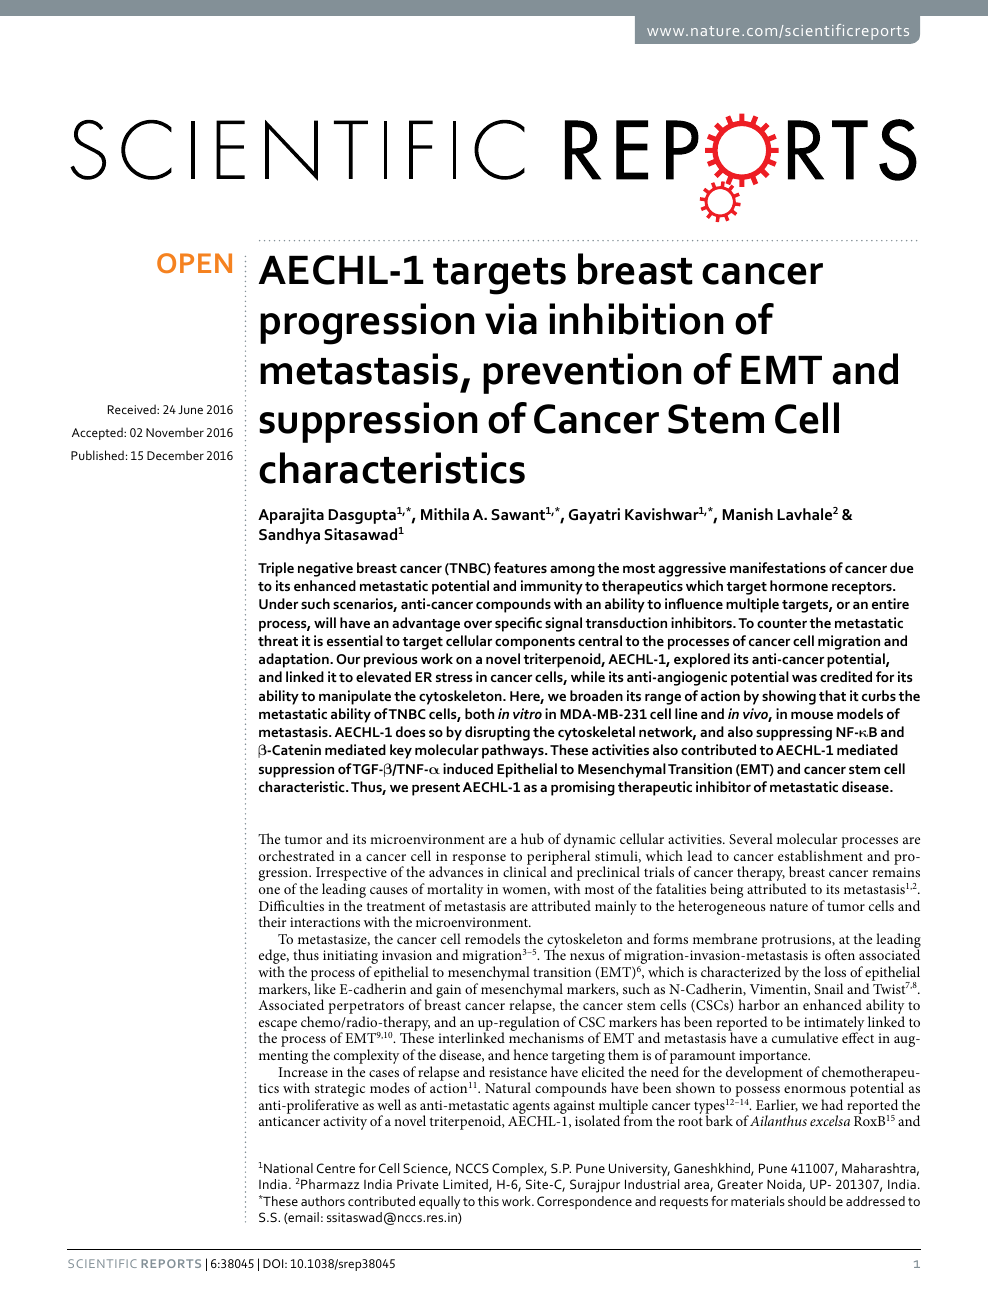 AECHL-1 targets breast cancer progression via inhibition of metastasis, prevention EMT suppression of Cancer Stem Cell characteristics – topic of research paper in Biological sciences. Download scholarly article PDF and